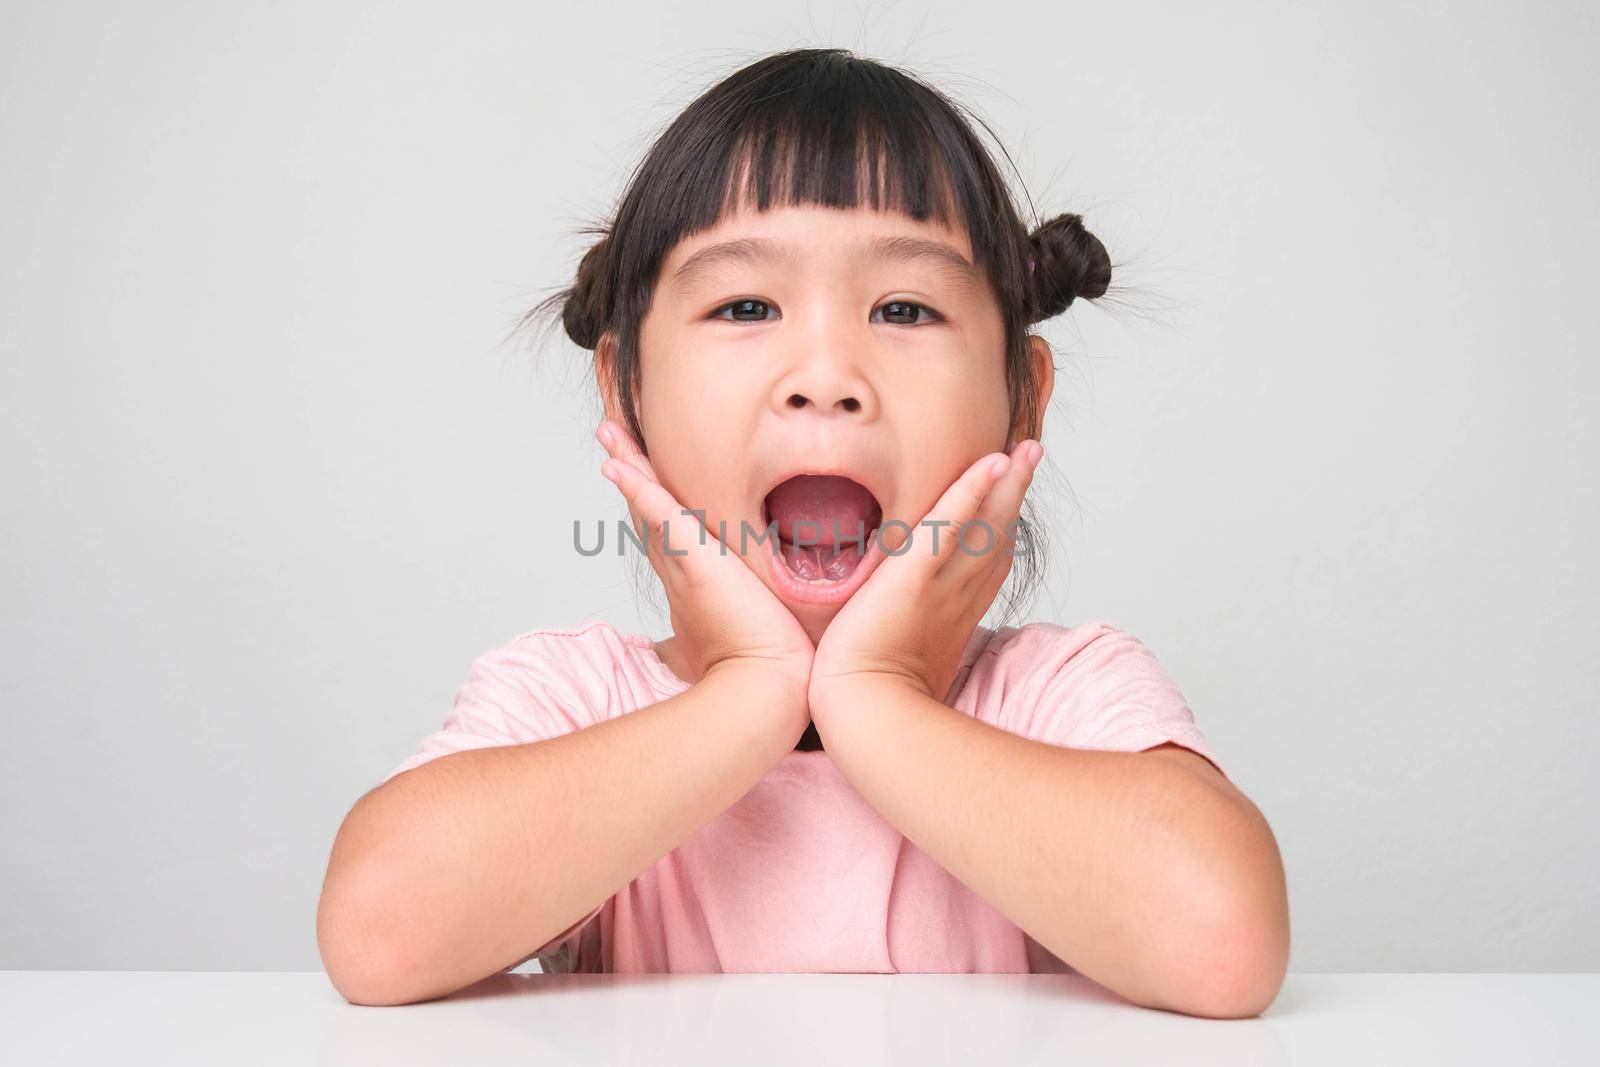 Cute little girl making a gesture to look attractive, cute, healthy, cheerful looking at the camera, isolated on white background. childhood happiness